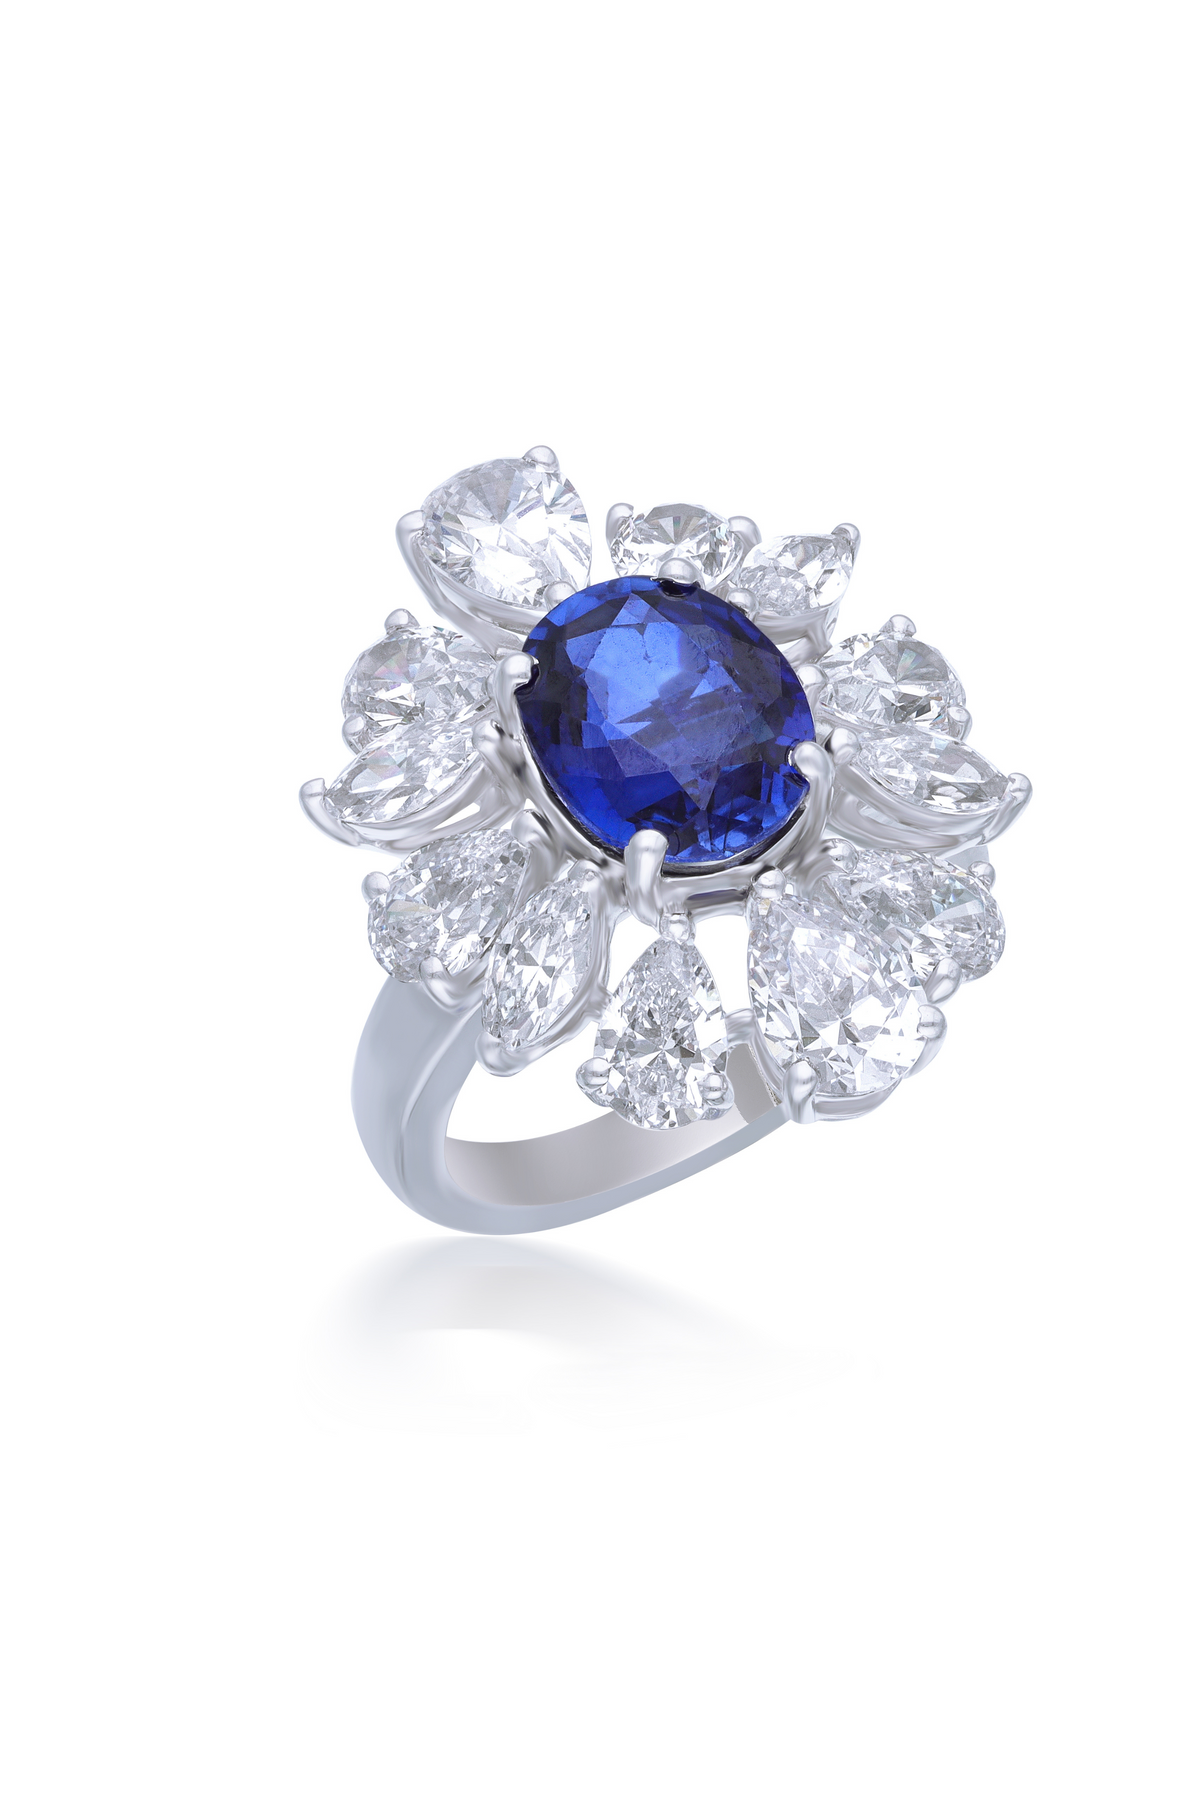 Cocktail White Oval Shaped Sapphire Ring